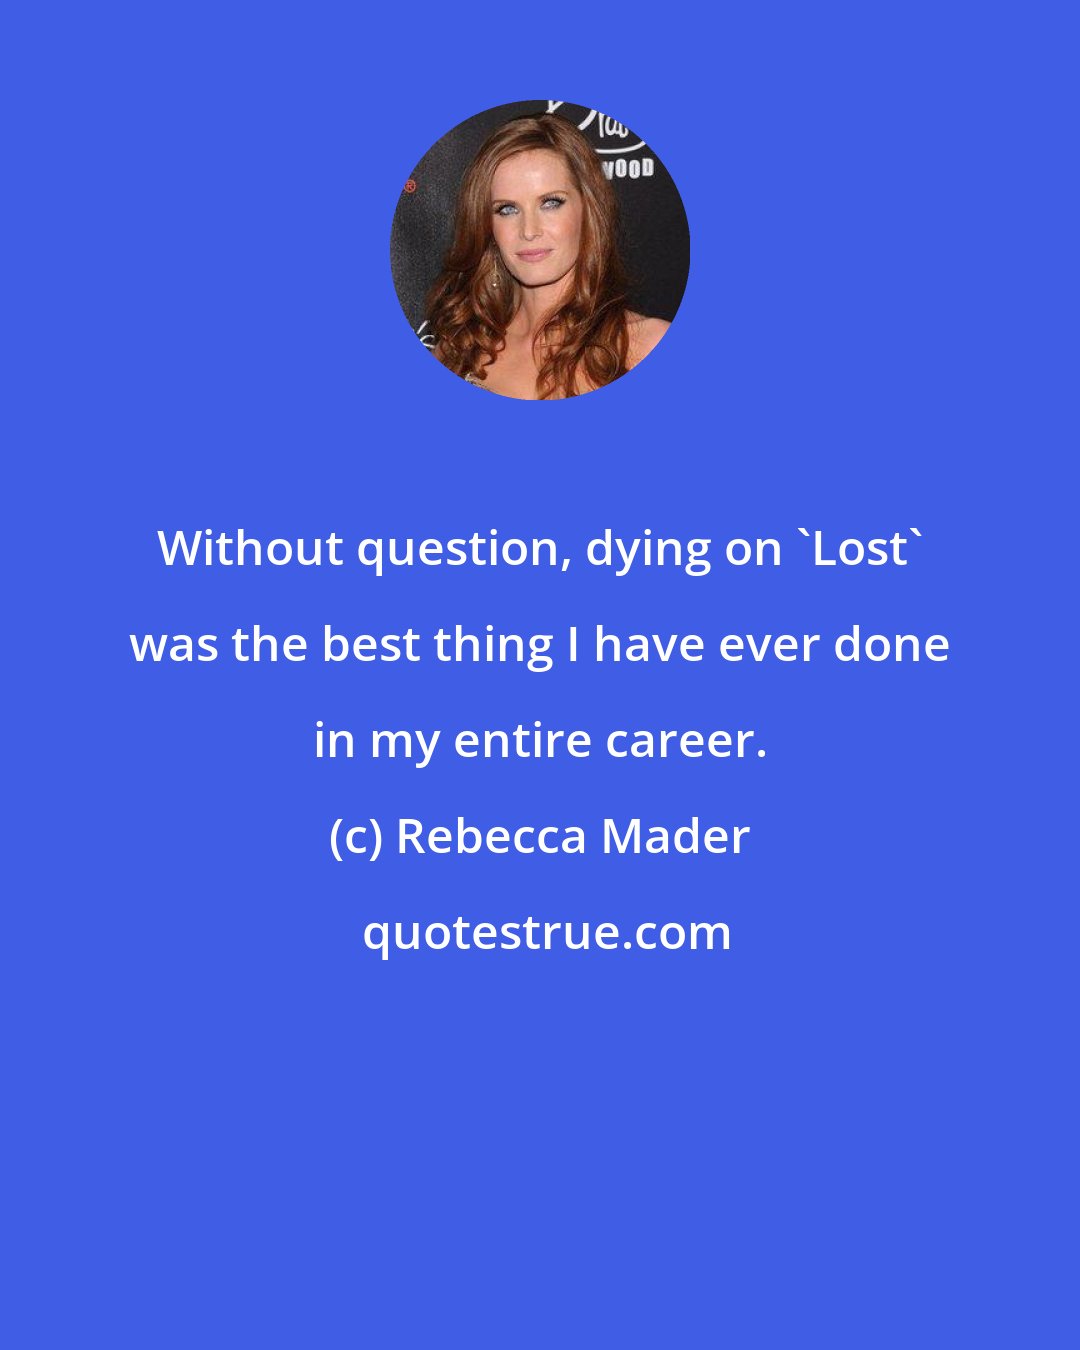 Rebecca Mader: Without question, dying on 'Lost' was the best thing I have ever done in my entire career.